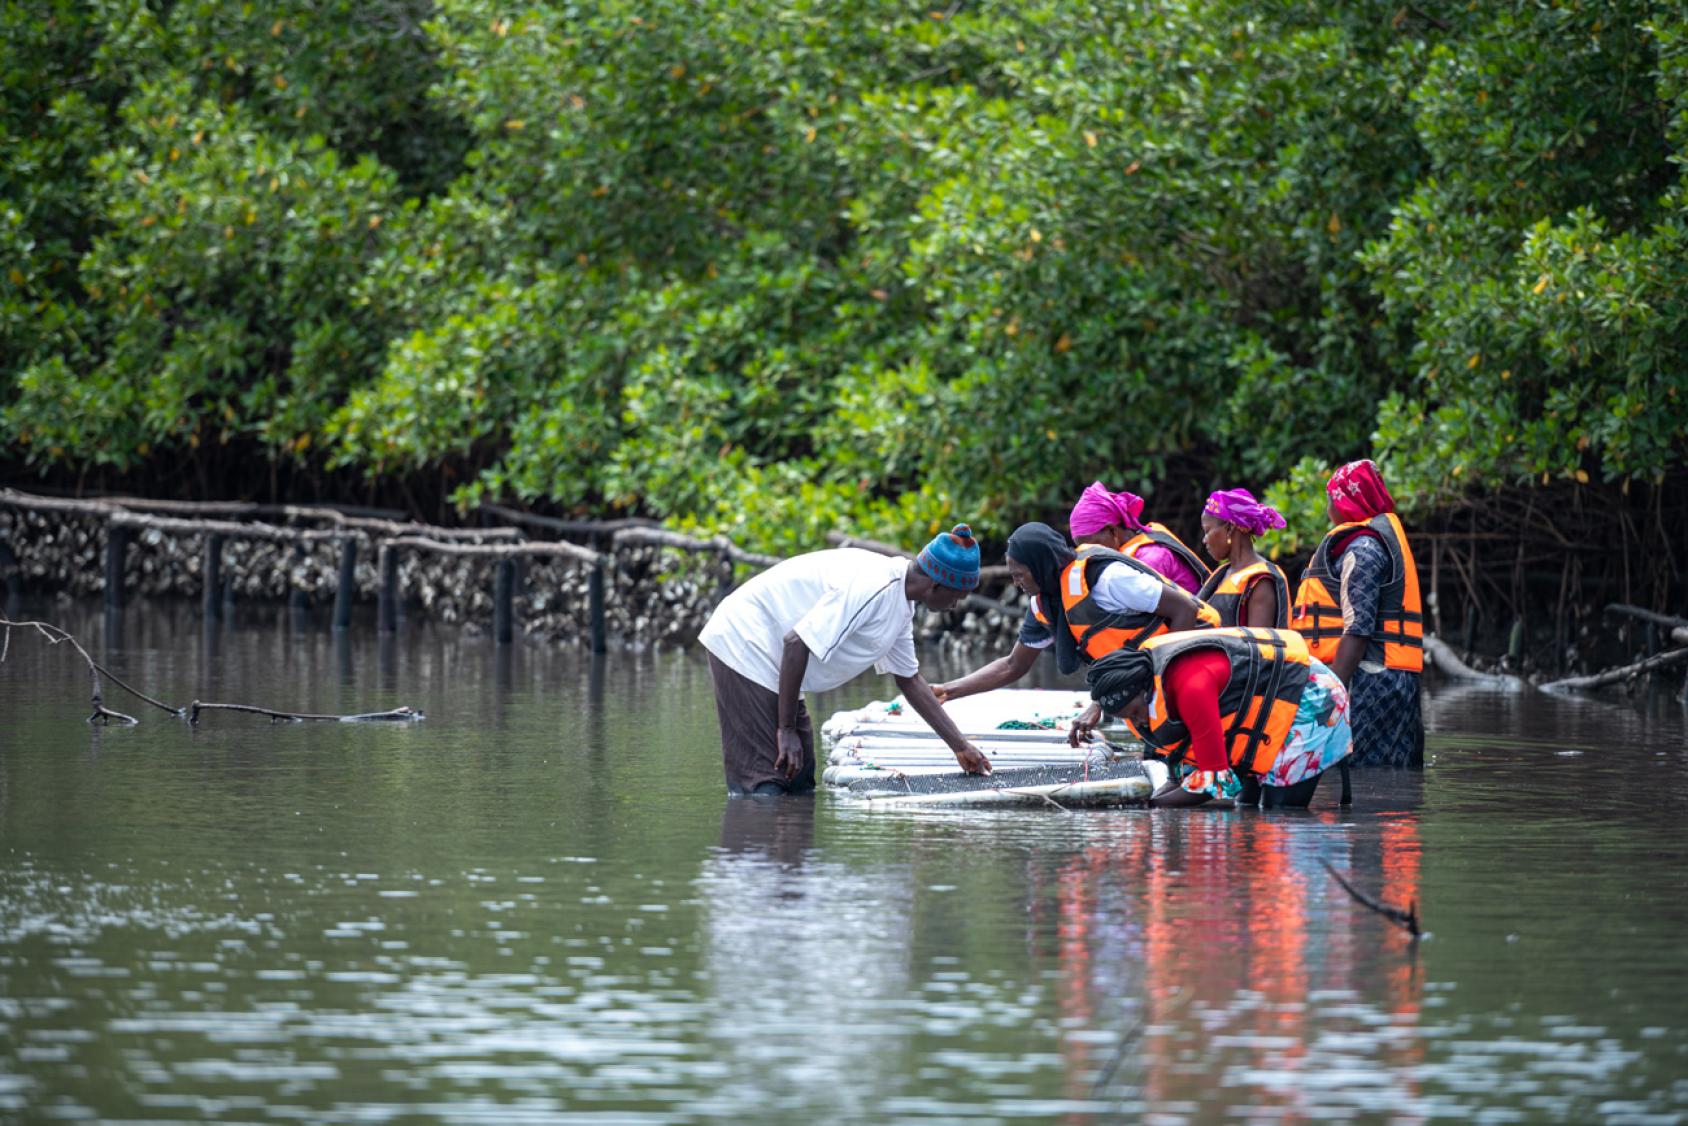 Several people inspect tehir oyster nets in a mangrove, in Senegal